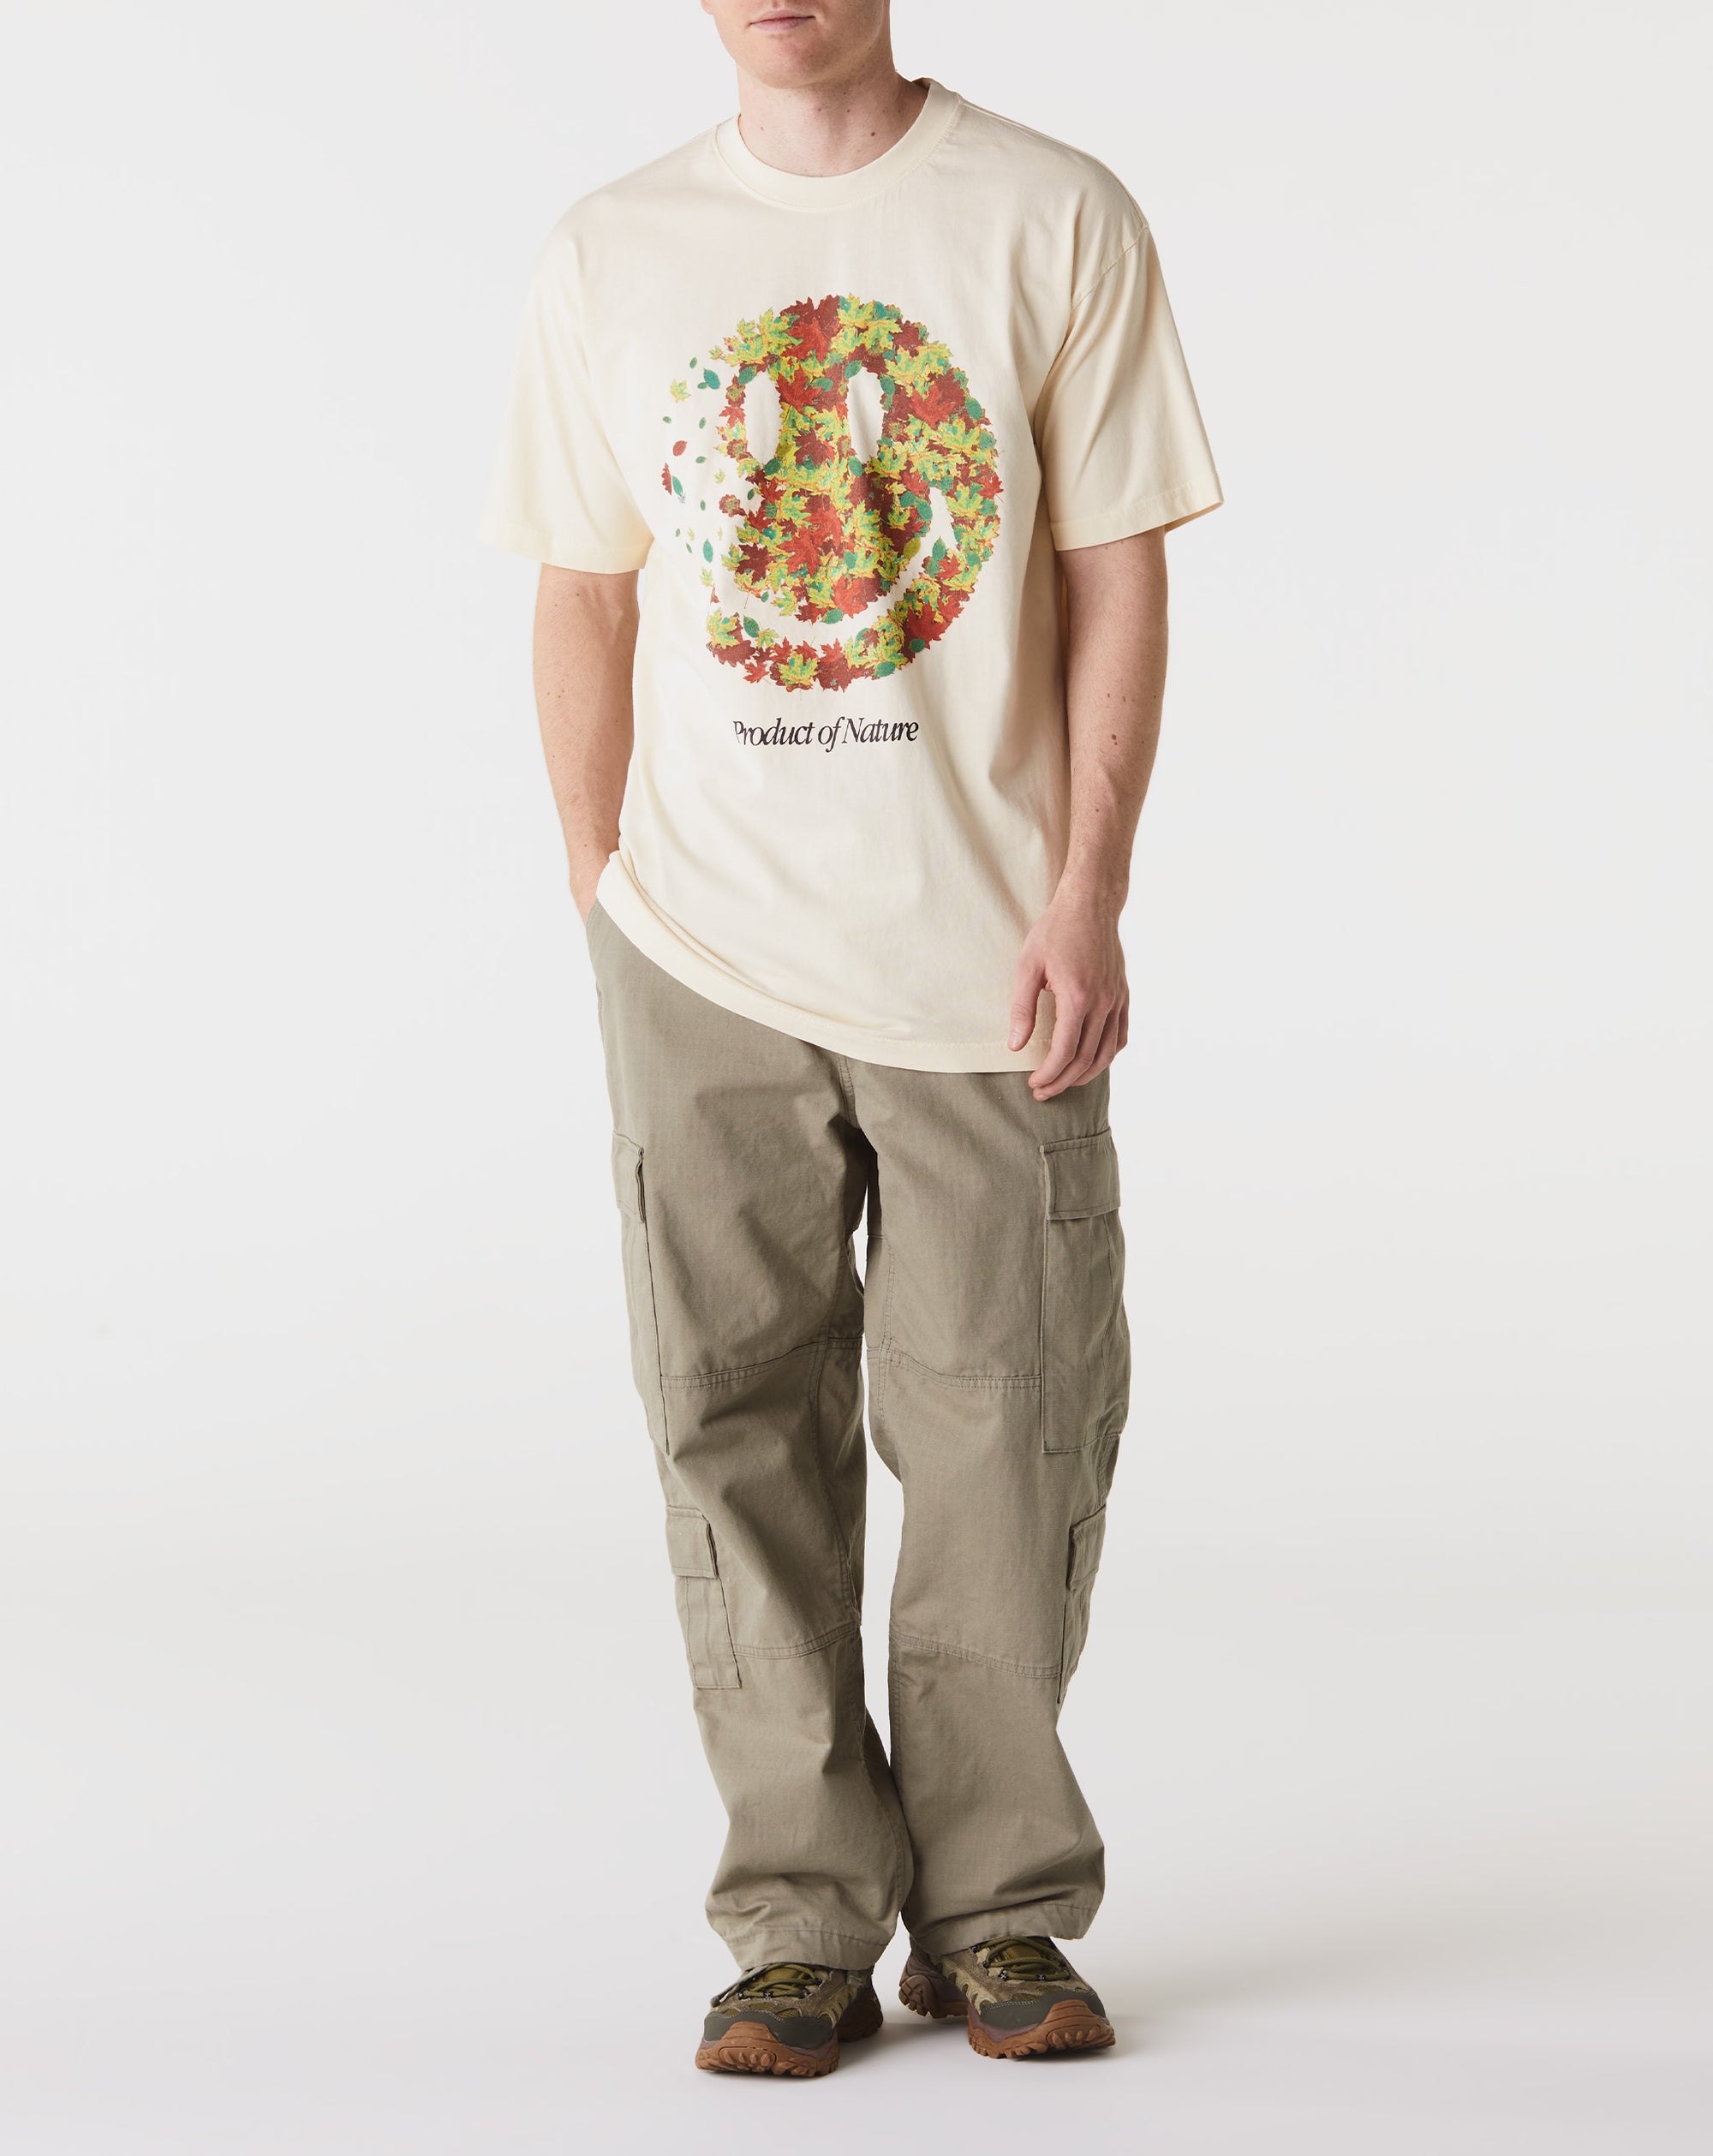 Market Smiley Product Of Nature T-Shirt - Rule of Next Apparel